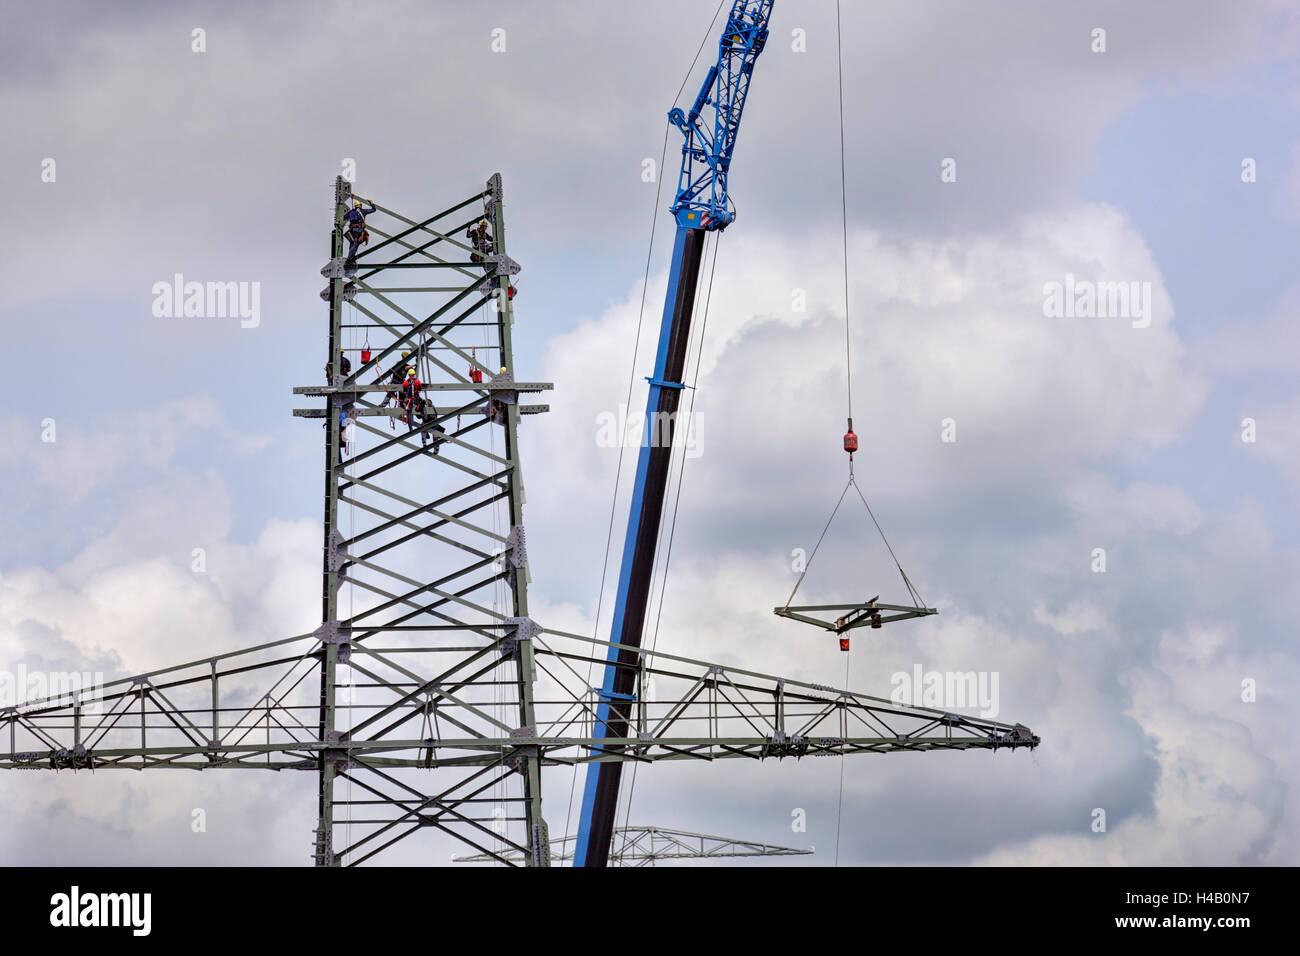 Assembling of the pylon, men working in the high-voltage power pylon, crane raising part of the pylon, Thuringian Forest Stock Photo